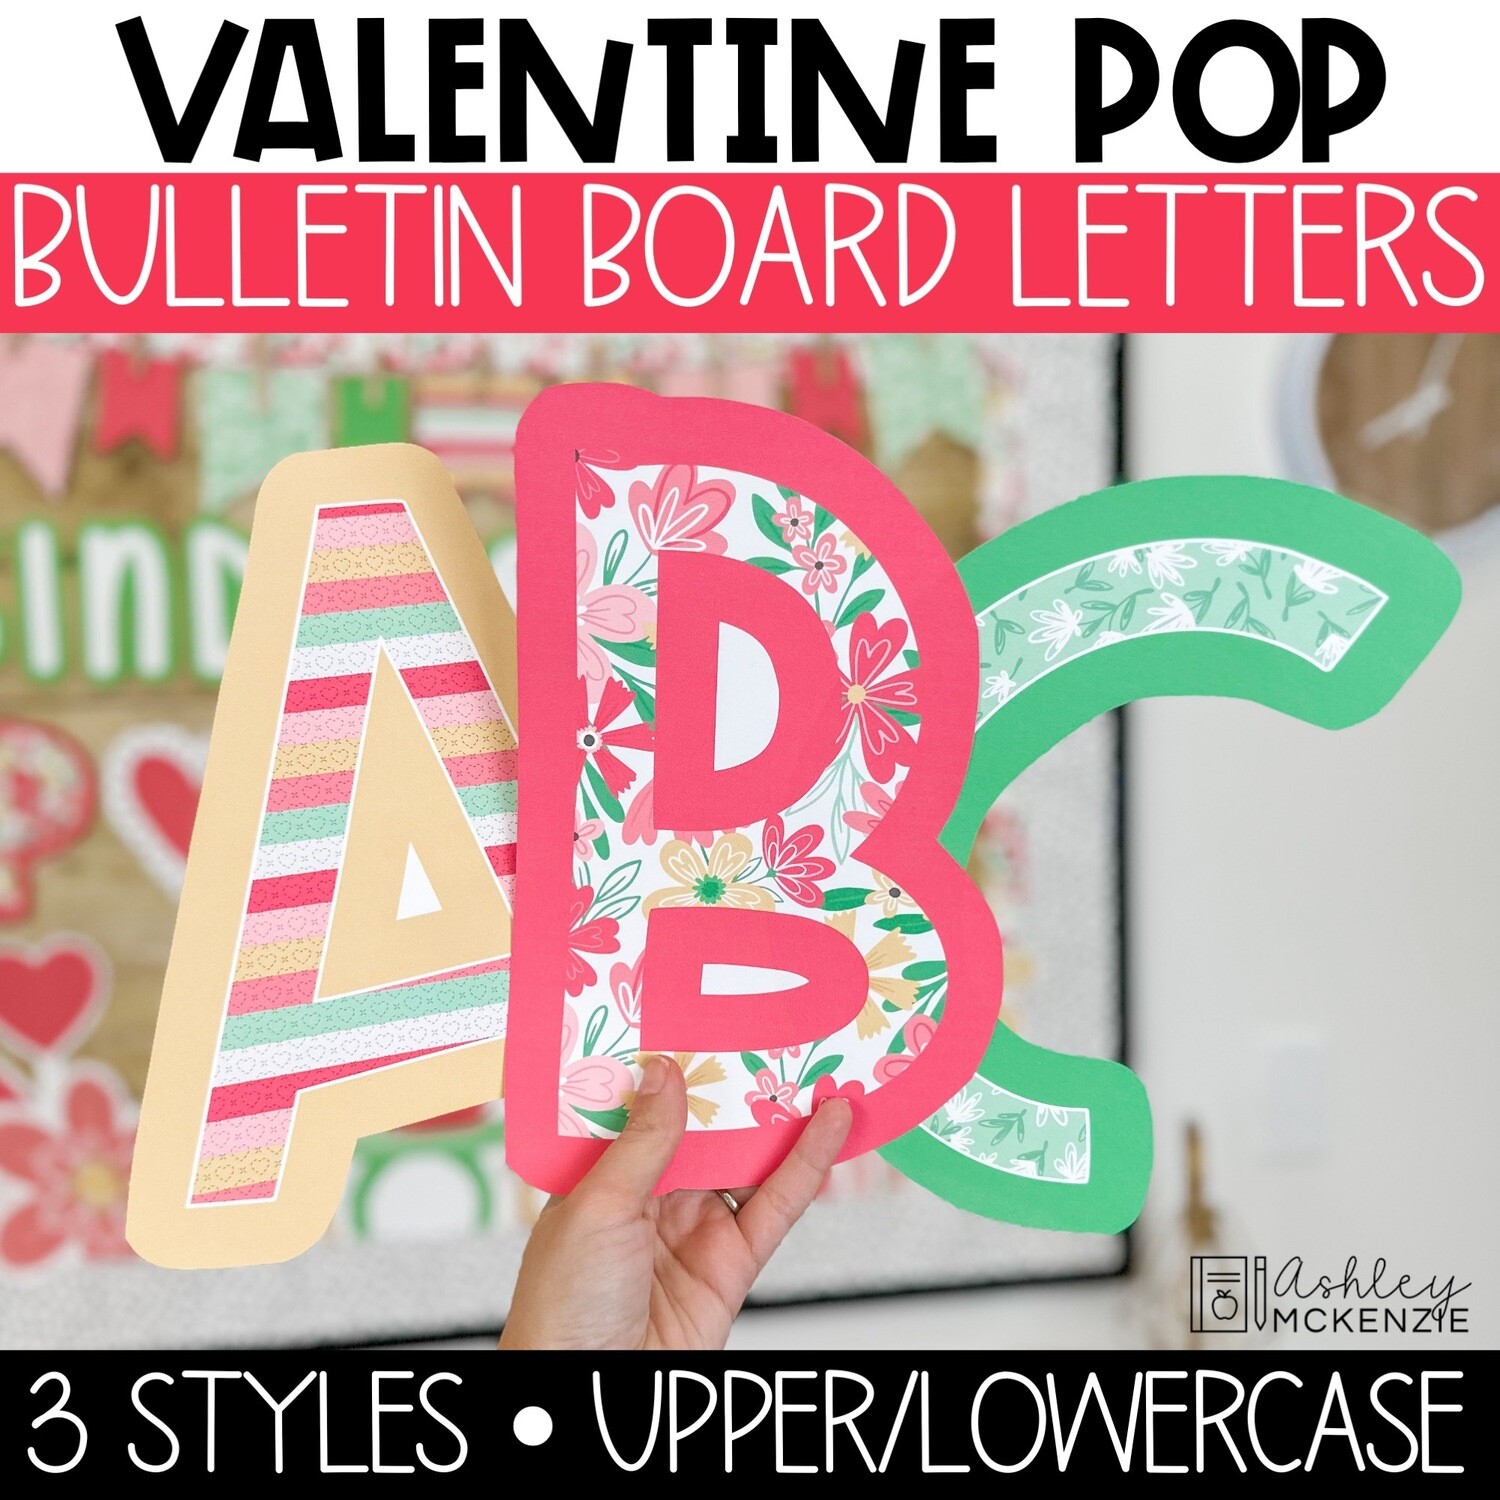 Valentine Pop A-Z Bulletin Board Letters, Punctuation, and Numbers